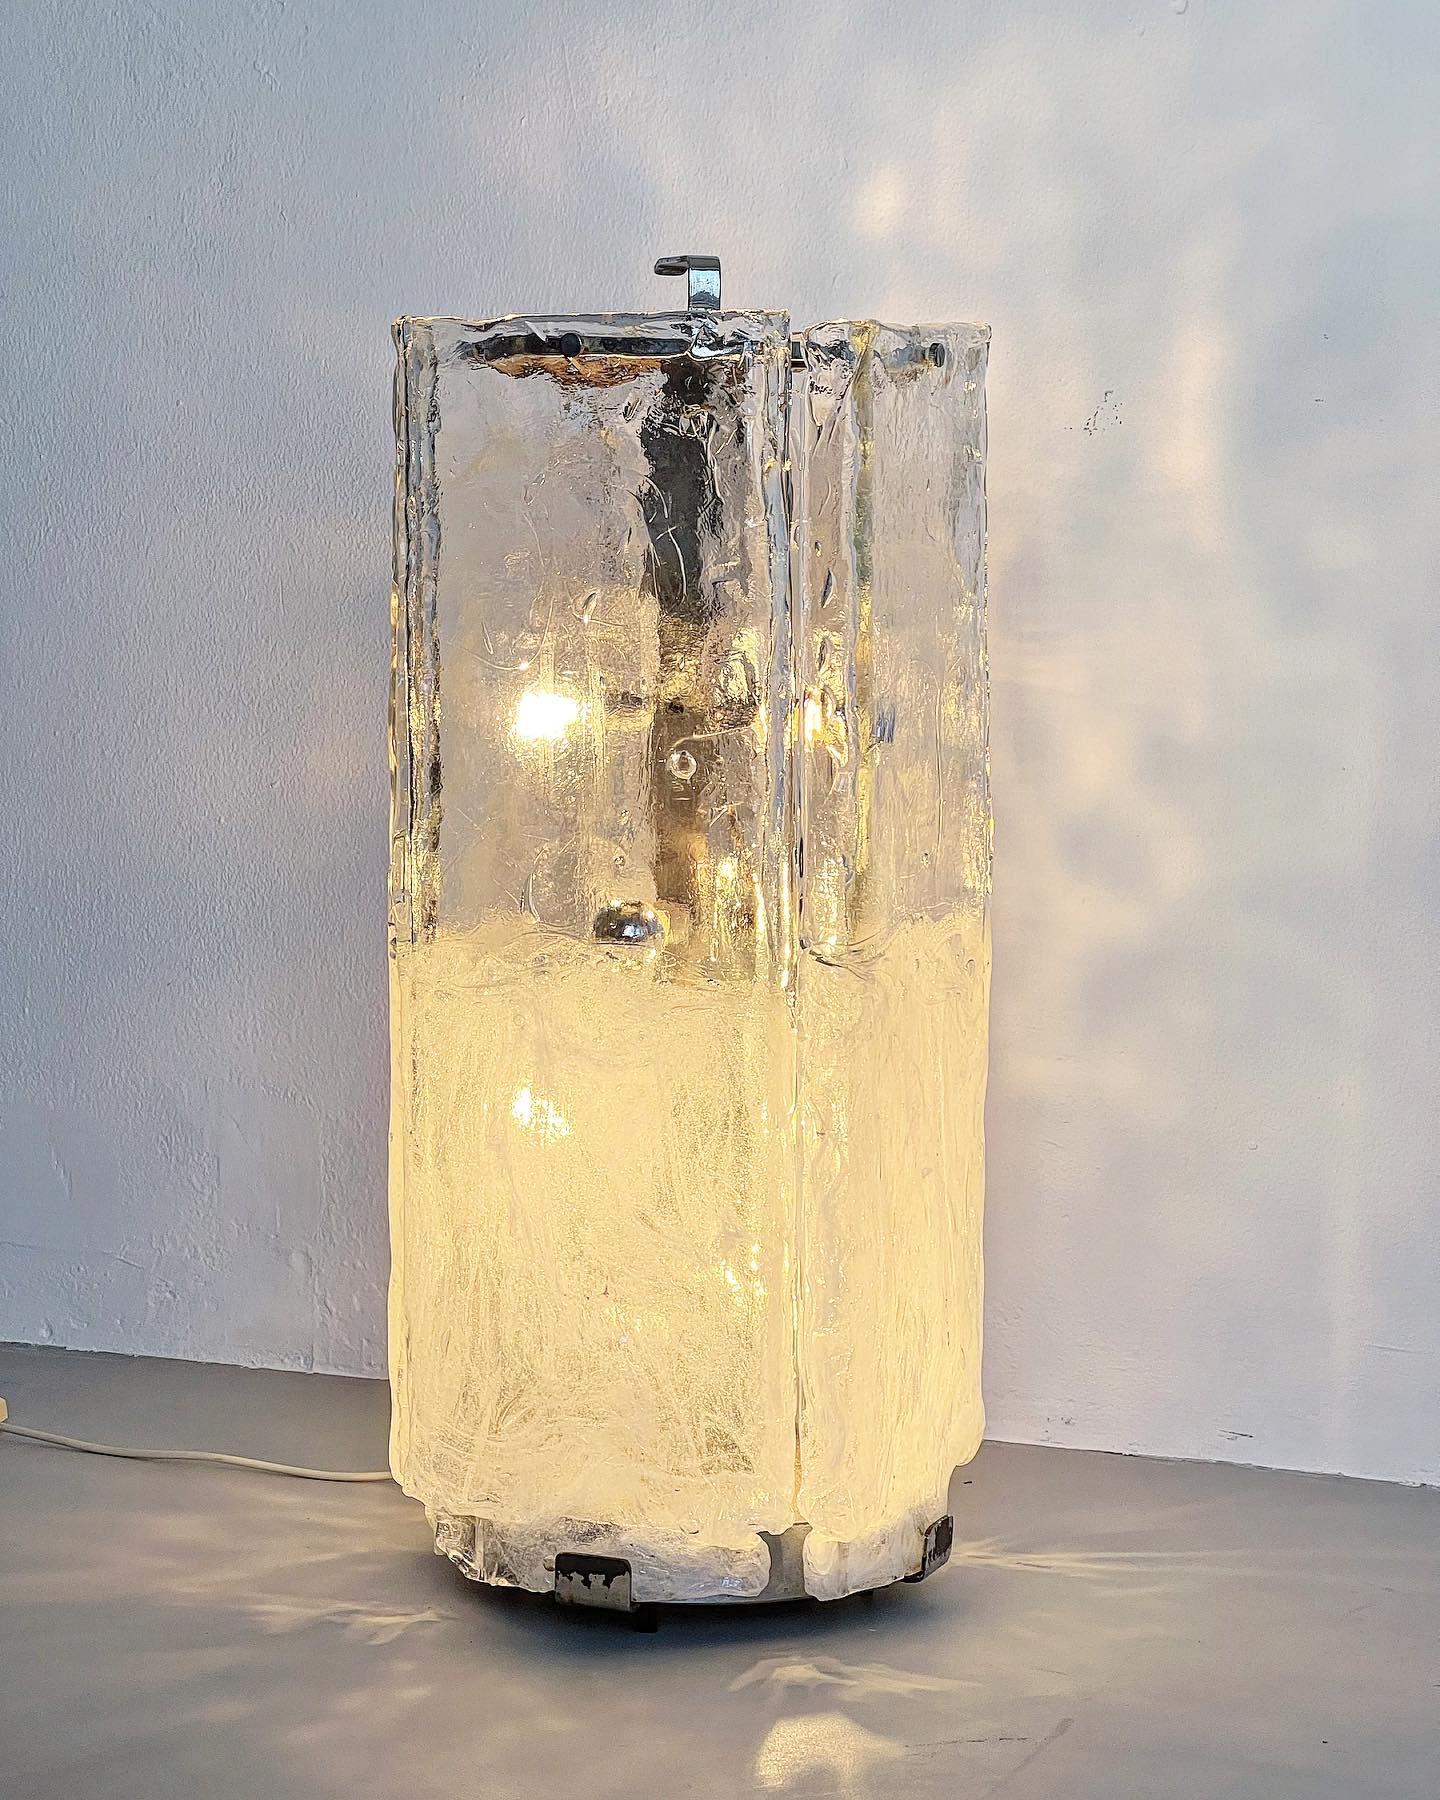 Offered for sale is a vintage floor lamp, made in Italy likely at the beginning of the 1960s. It has a self-standing structure in chromed metal and three large, thick Murano glass panels - each measuring 35cm in width and 65 in height - serving as